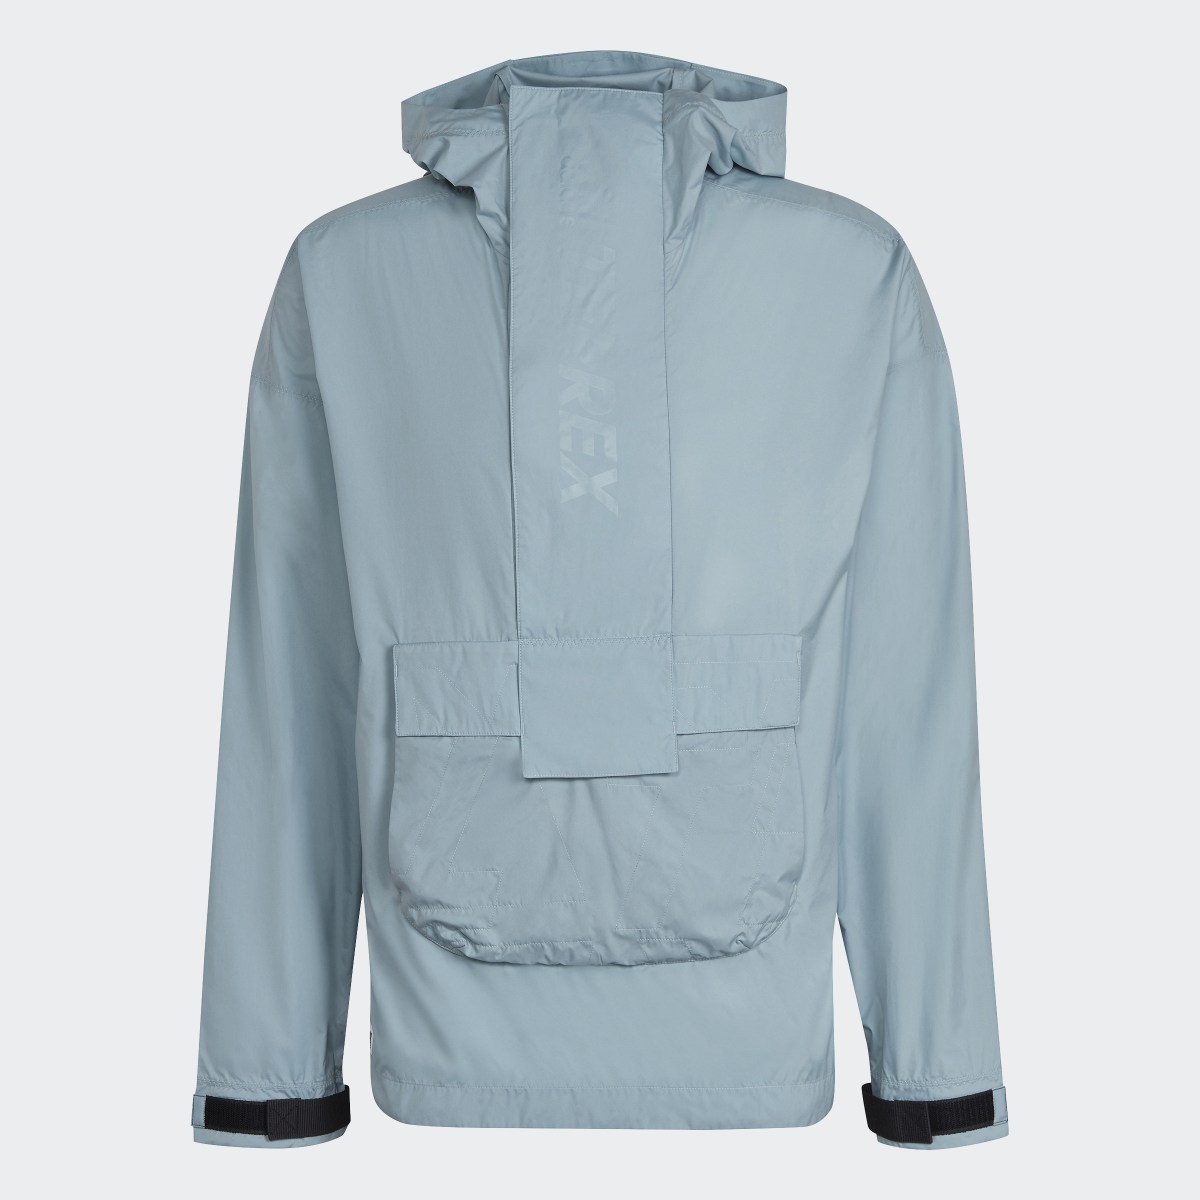 Adidas Terrex Made to be Remade Wind Anorak. 8